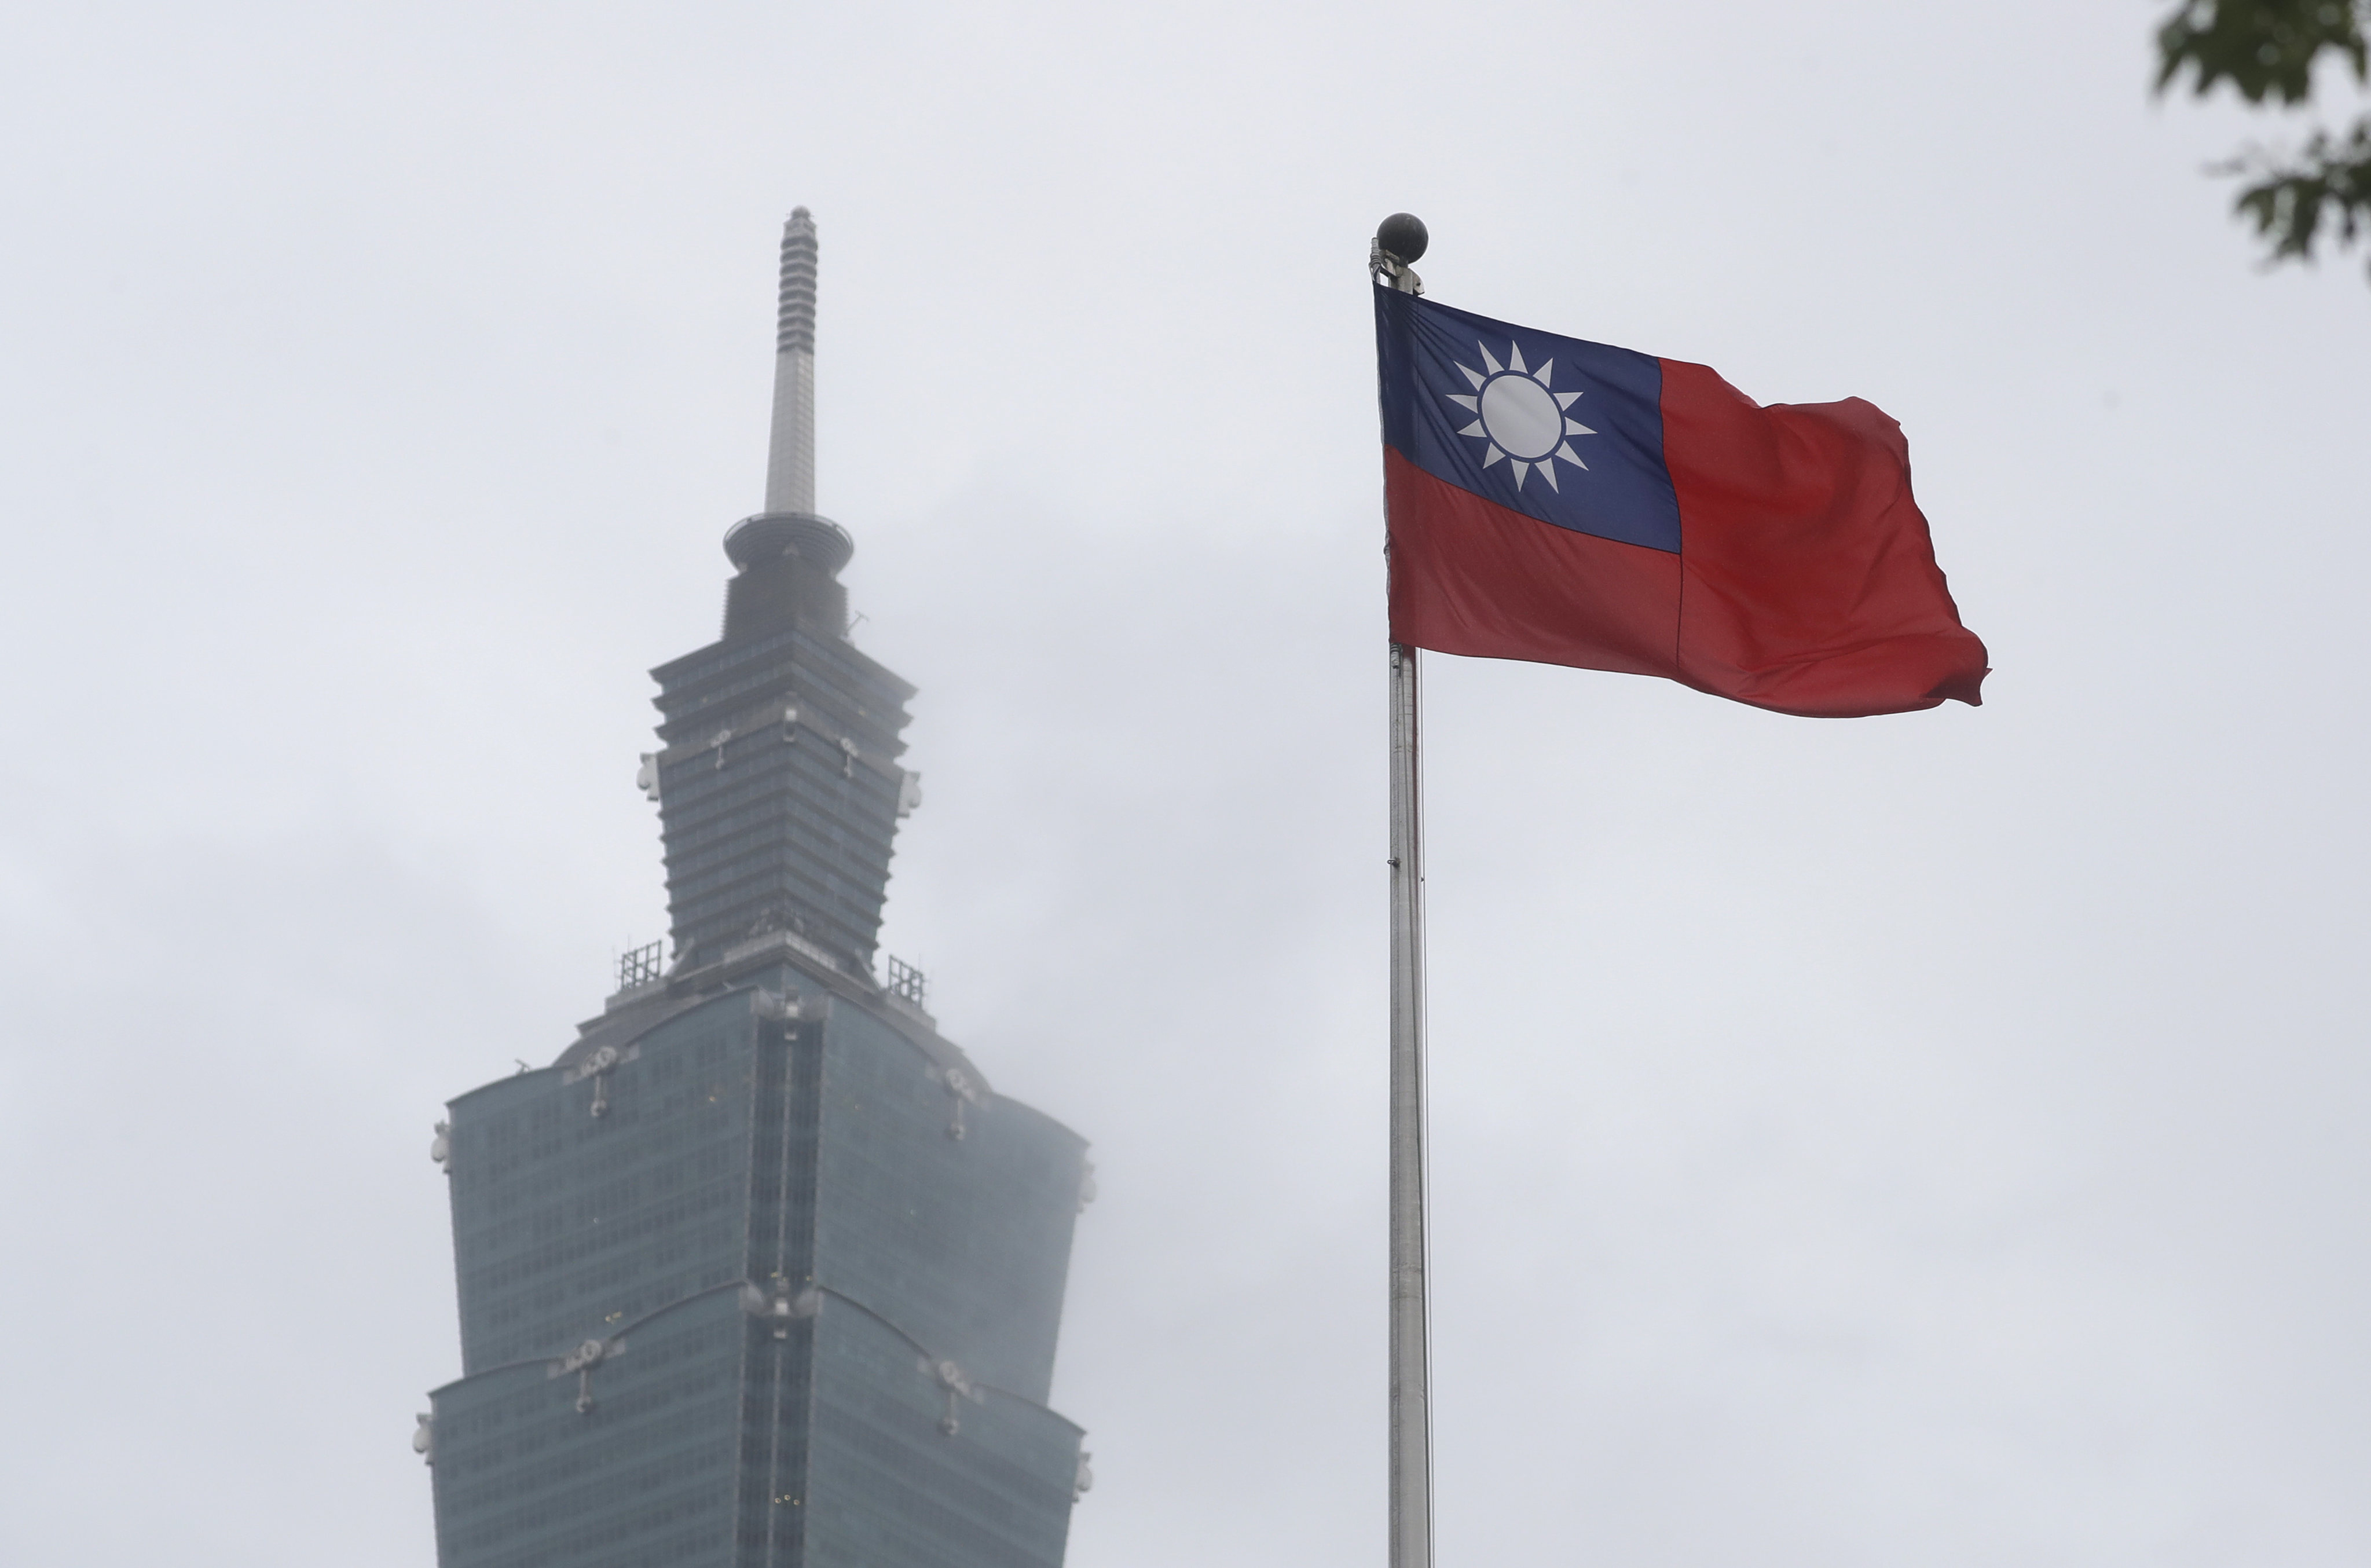 Beijing insists there is only one China and views the use of the official name Taiwan, rather than the Republic of China, as a provocation. Photo: AP